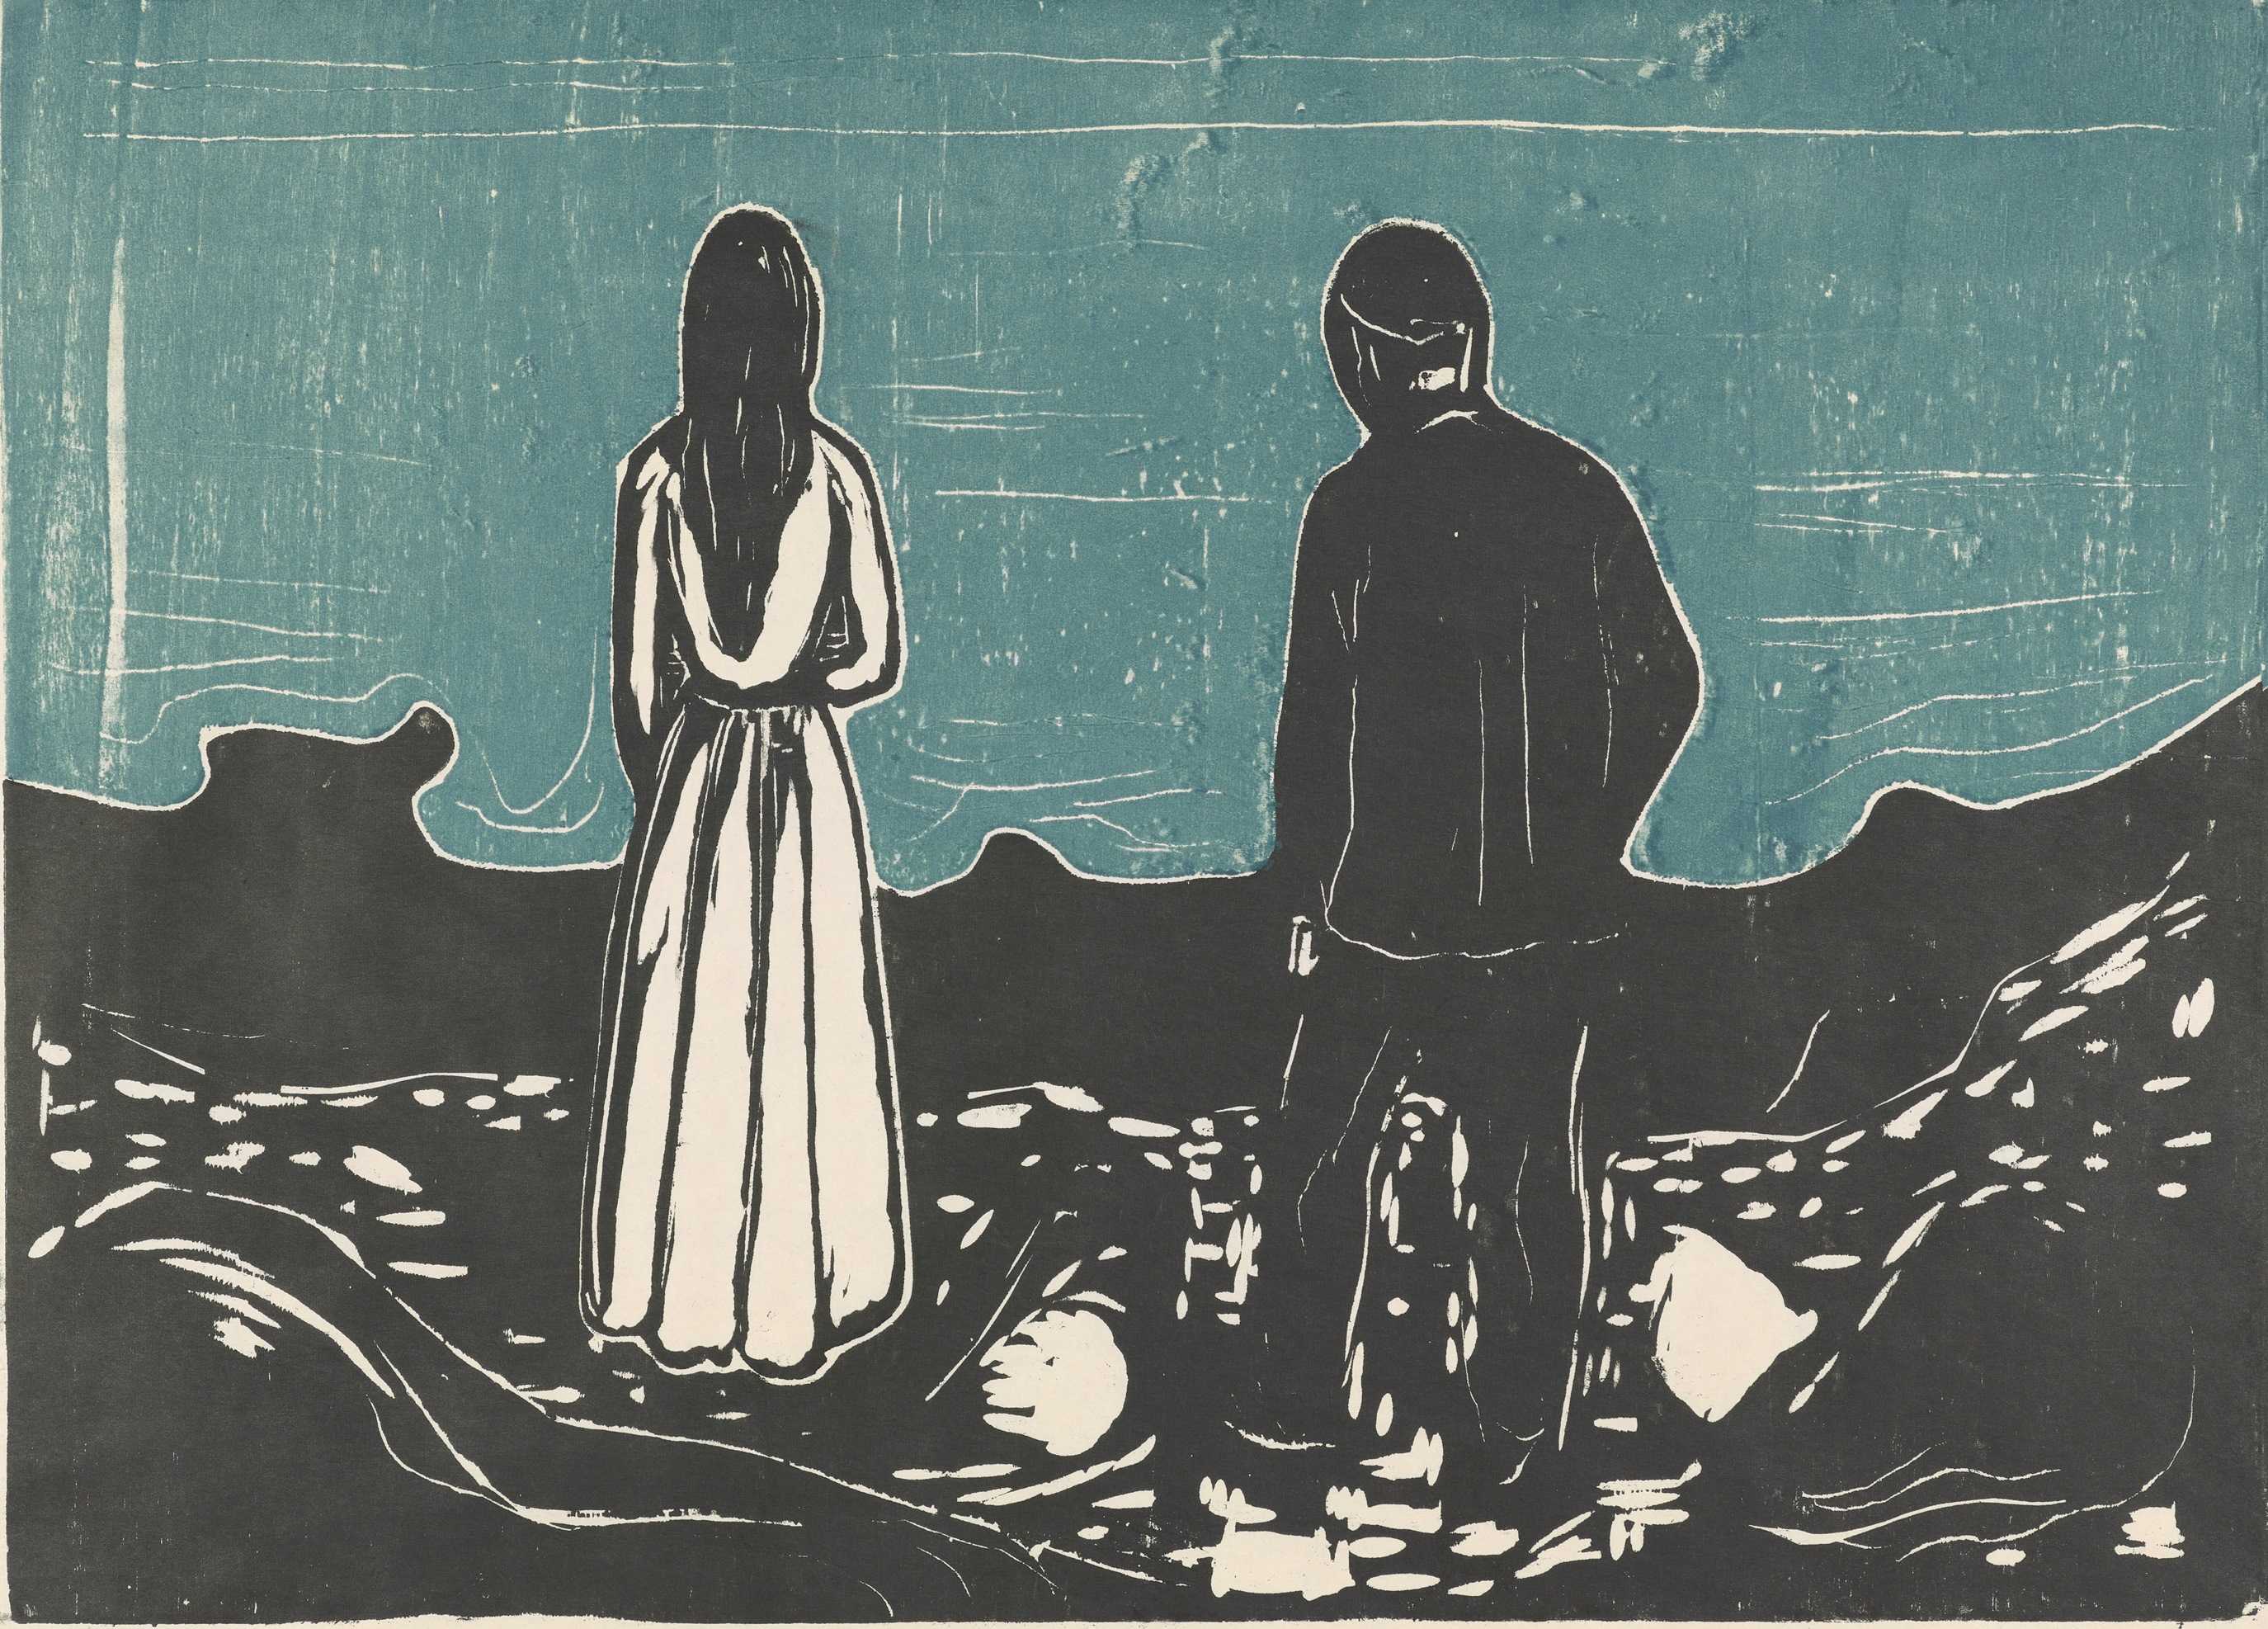 Edvard Munch: Love and Angst, Exhibition, British Museum, London: 11 April 2019 - 21 July 2019